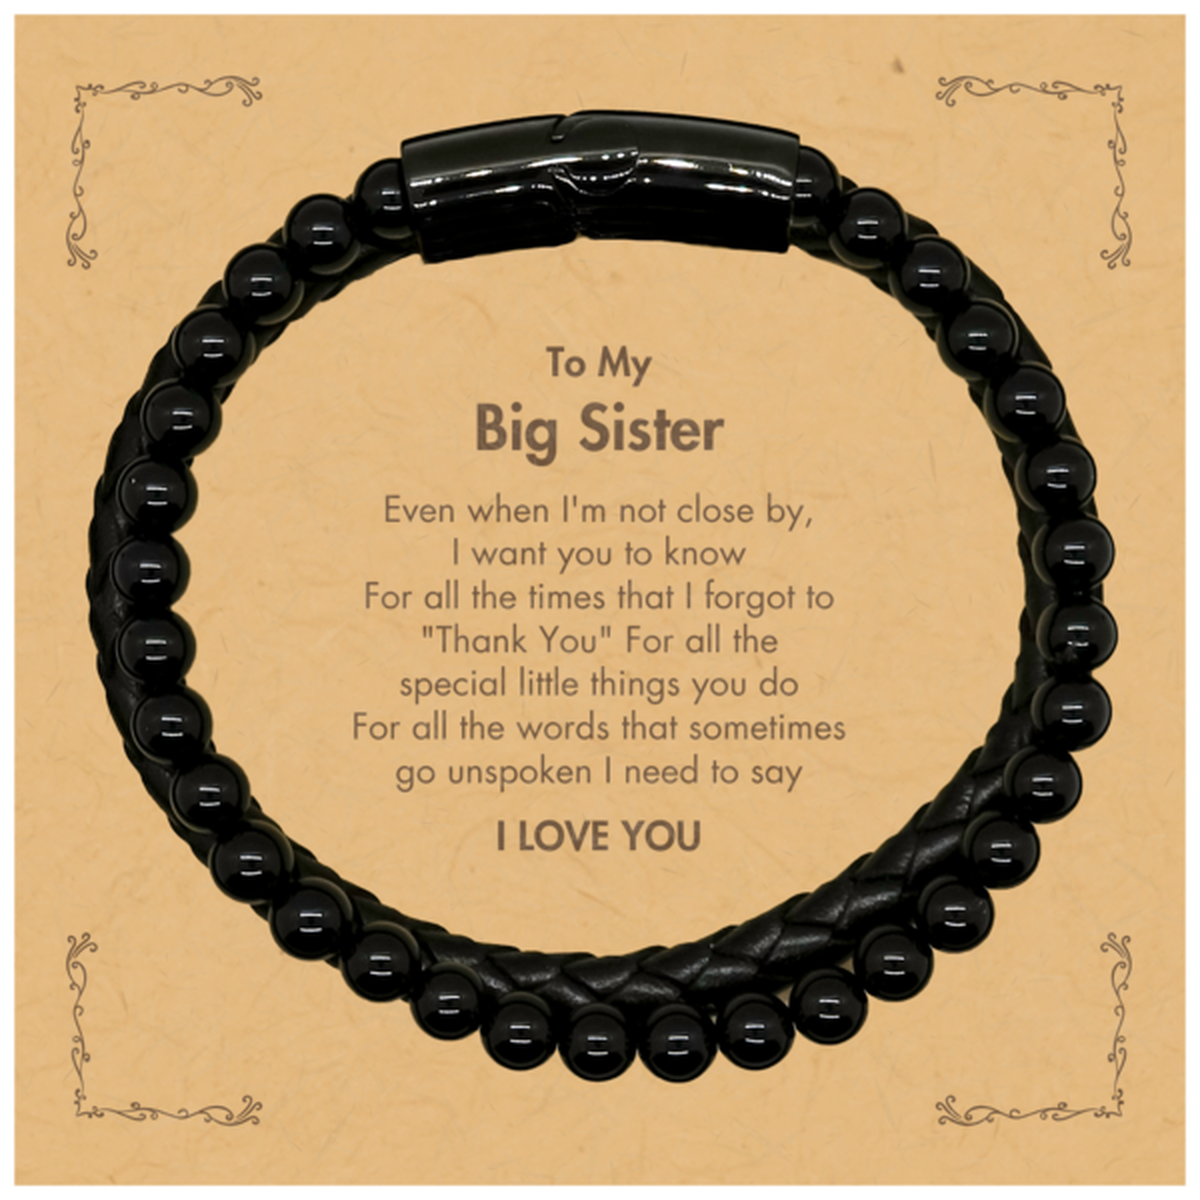 Thank You Gifts for Big Sister, Keepsake Stone Leather Bracelets Gifts for Big Sister Birthday Mother's day Father's Day Big Sister For all the words That sometimes go unspoken I need to say I LOVE YOU